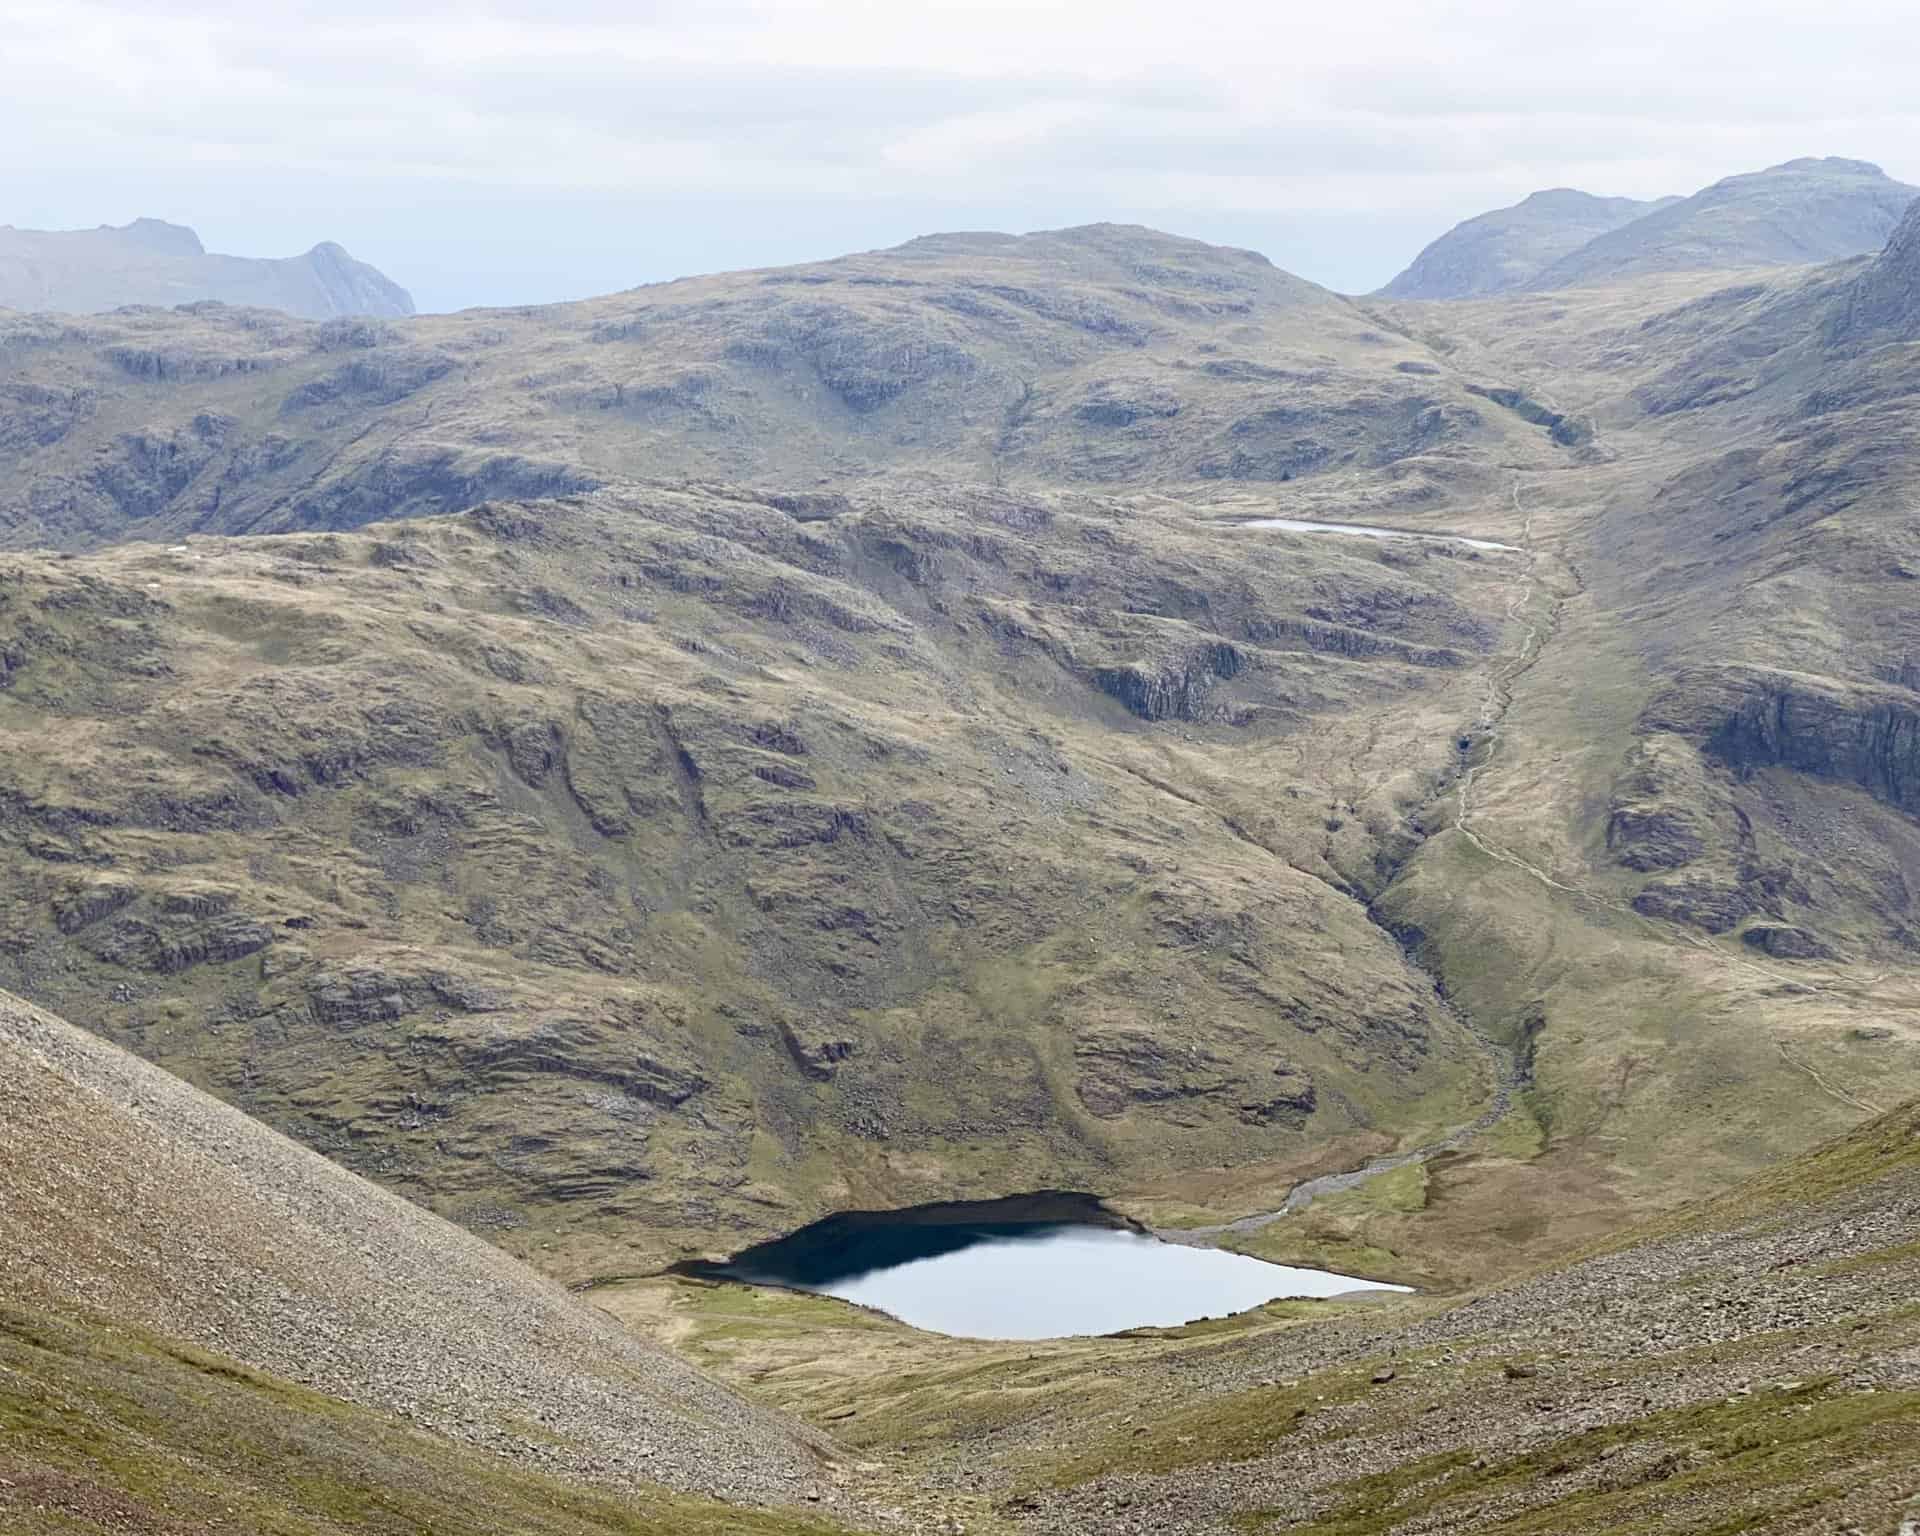 Another view of Styhead Tarn and Sprinkling Tarn. To the far left of the picture on the horizon are the knobbly peaks of Pike of Stickle and Harrison Stickle in the Langdale Fells.